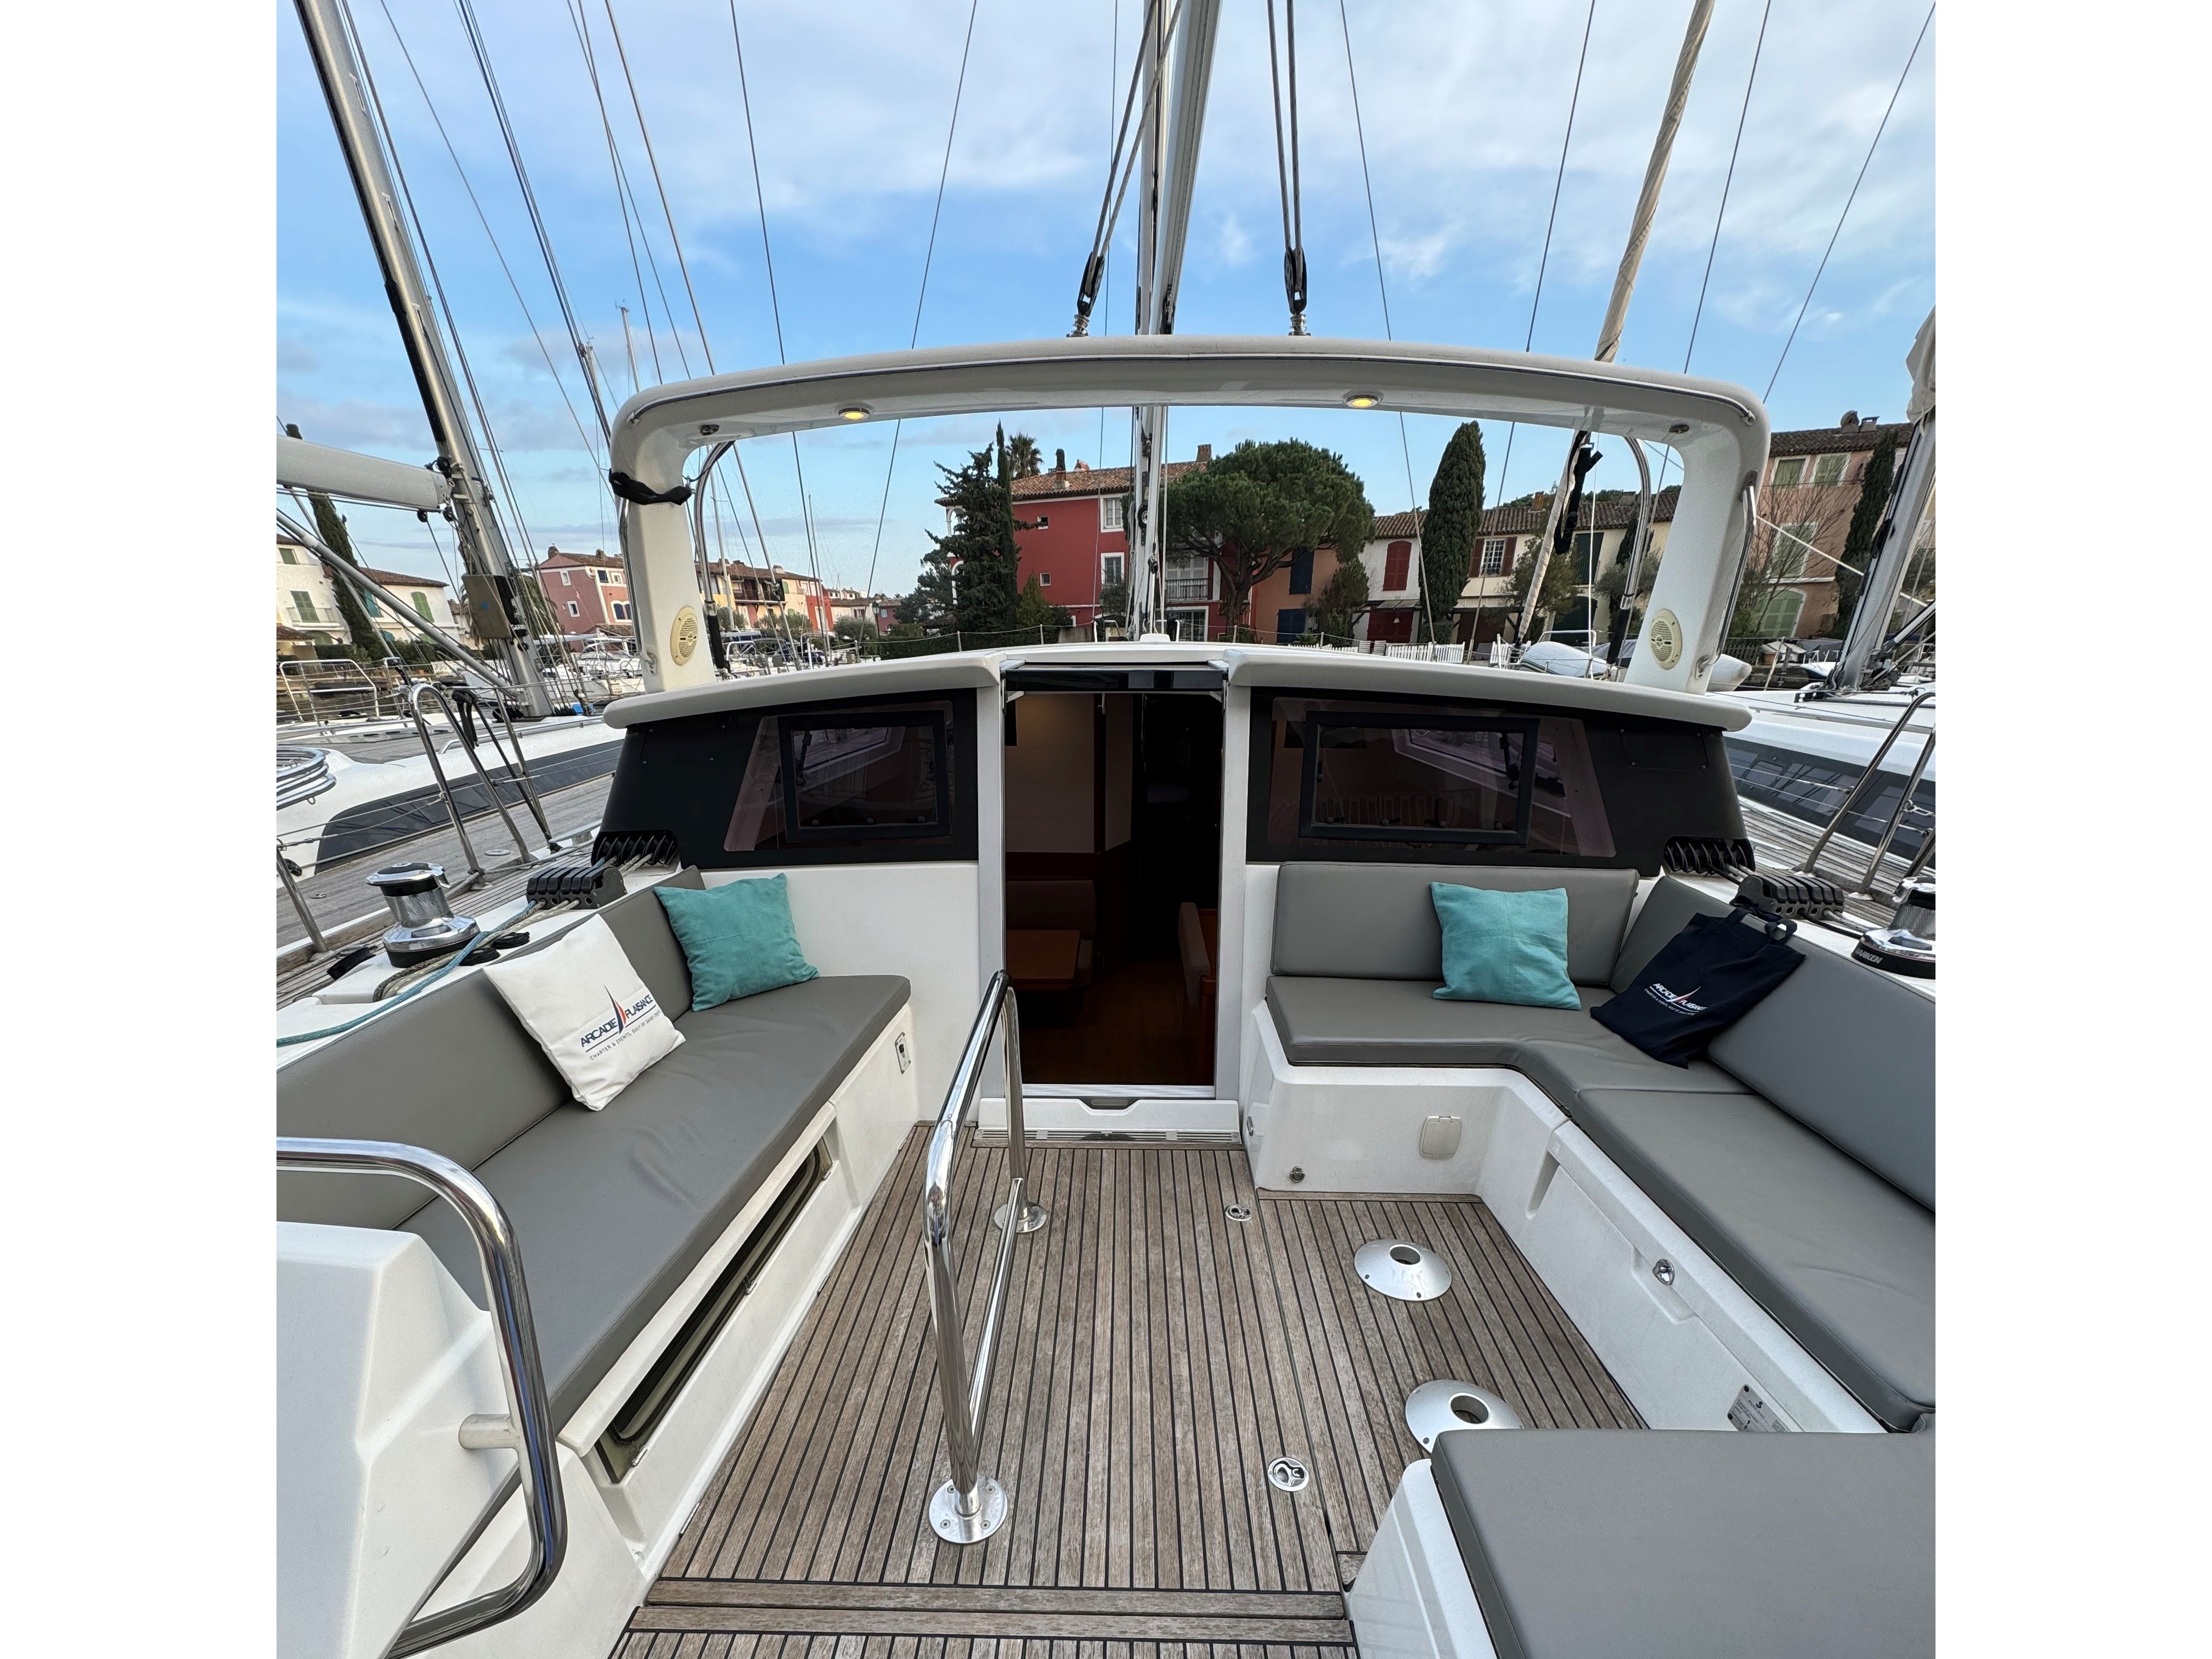 Sense 50 - Sailboat Charter France & Boat hire in France French Riviera Grimaud Port Grimaud 1